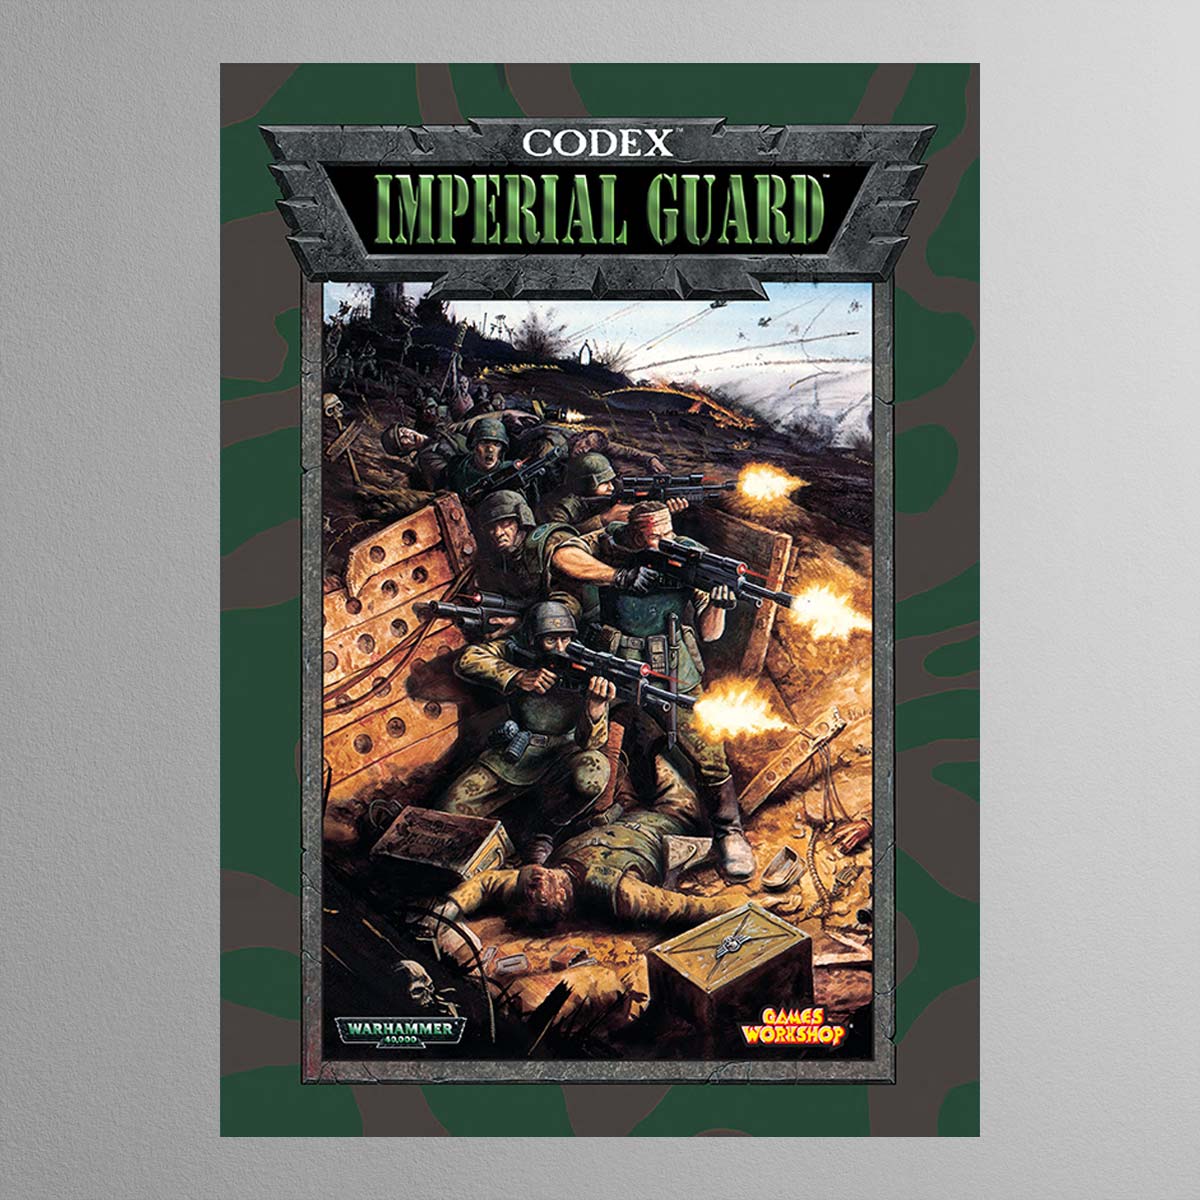 Warhammer 40,000 3rd Edition – Imperial Guard – Print